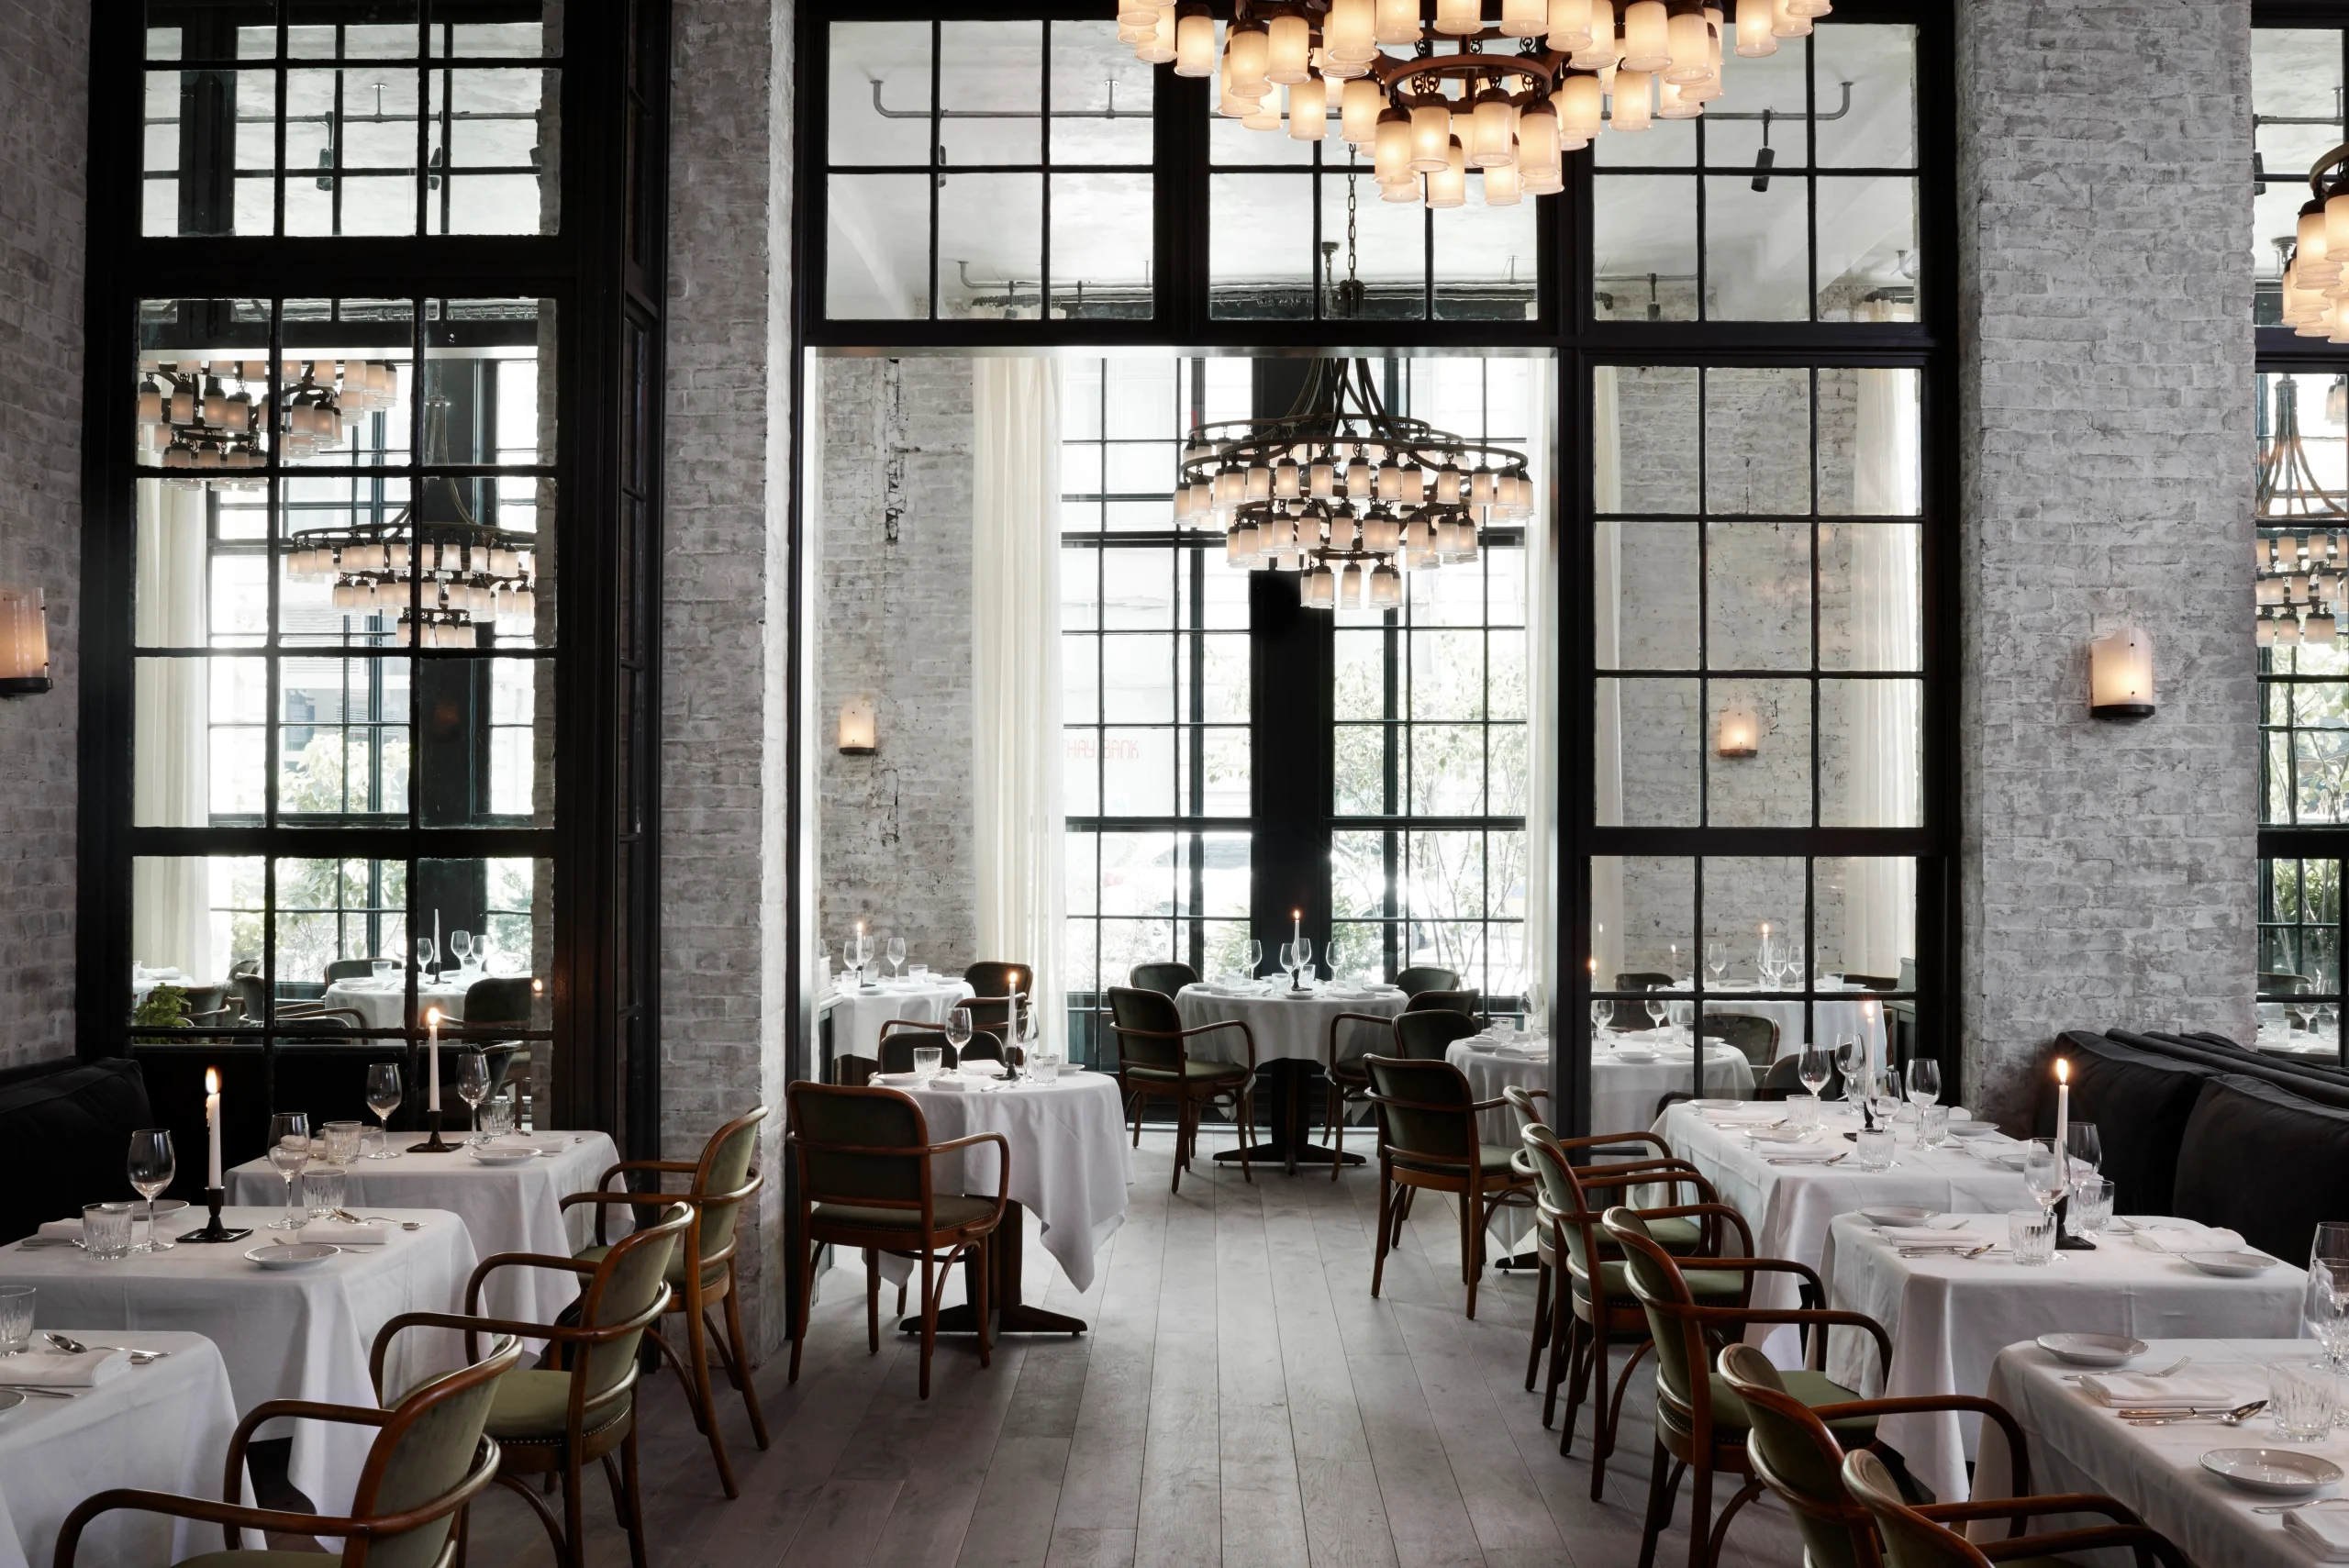 Le Coucou - Most Expensive Restaurant in NYC